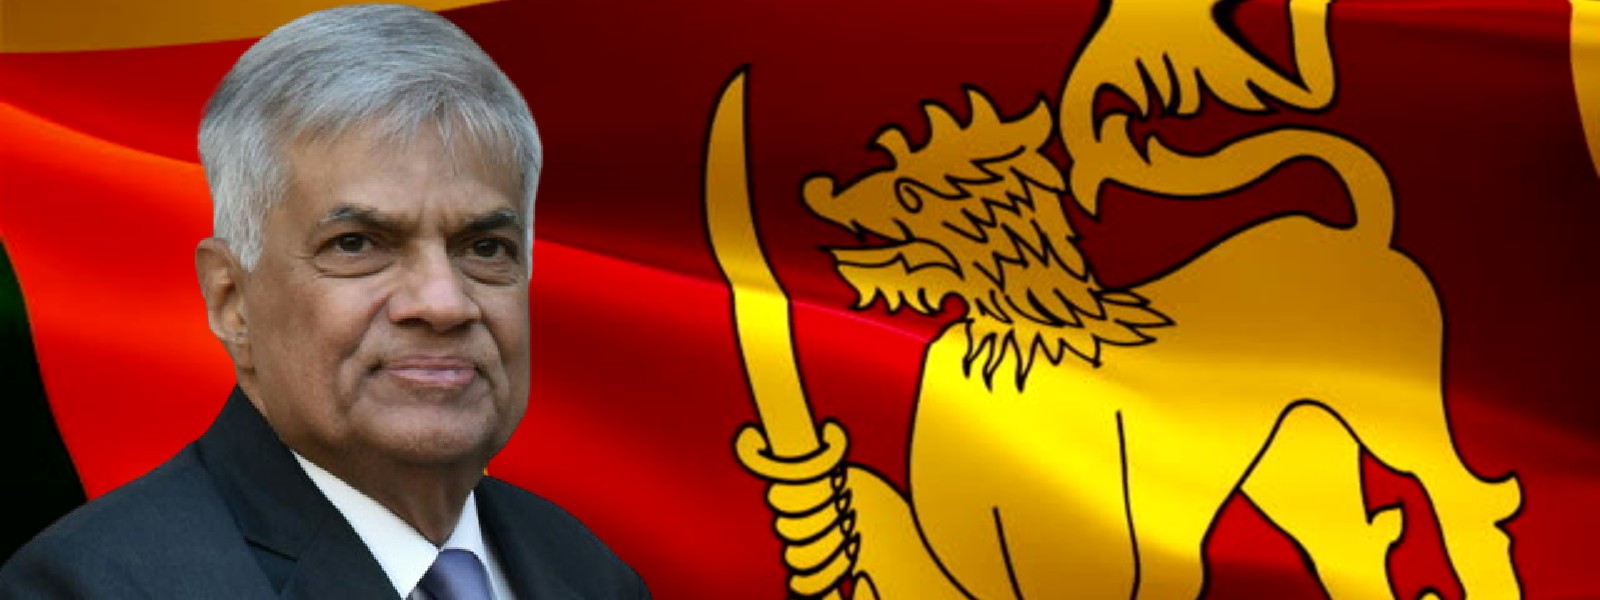 Ranil to be sworn in as new President